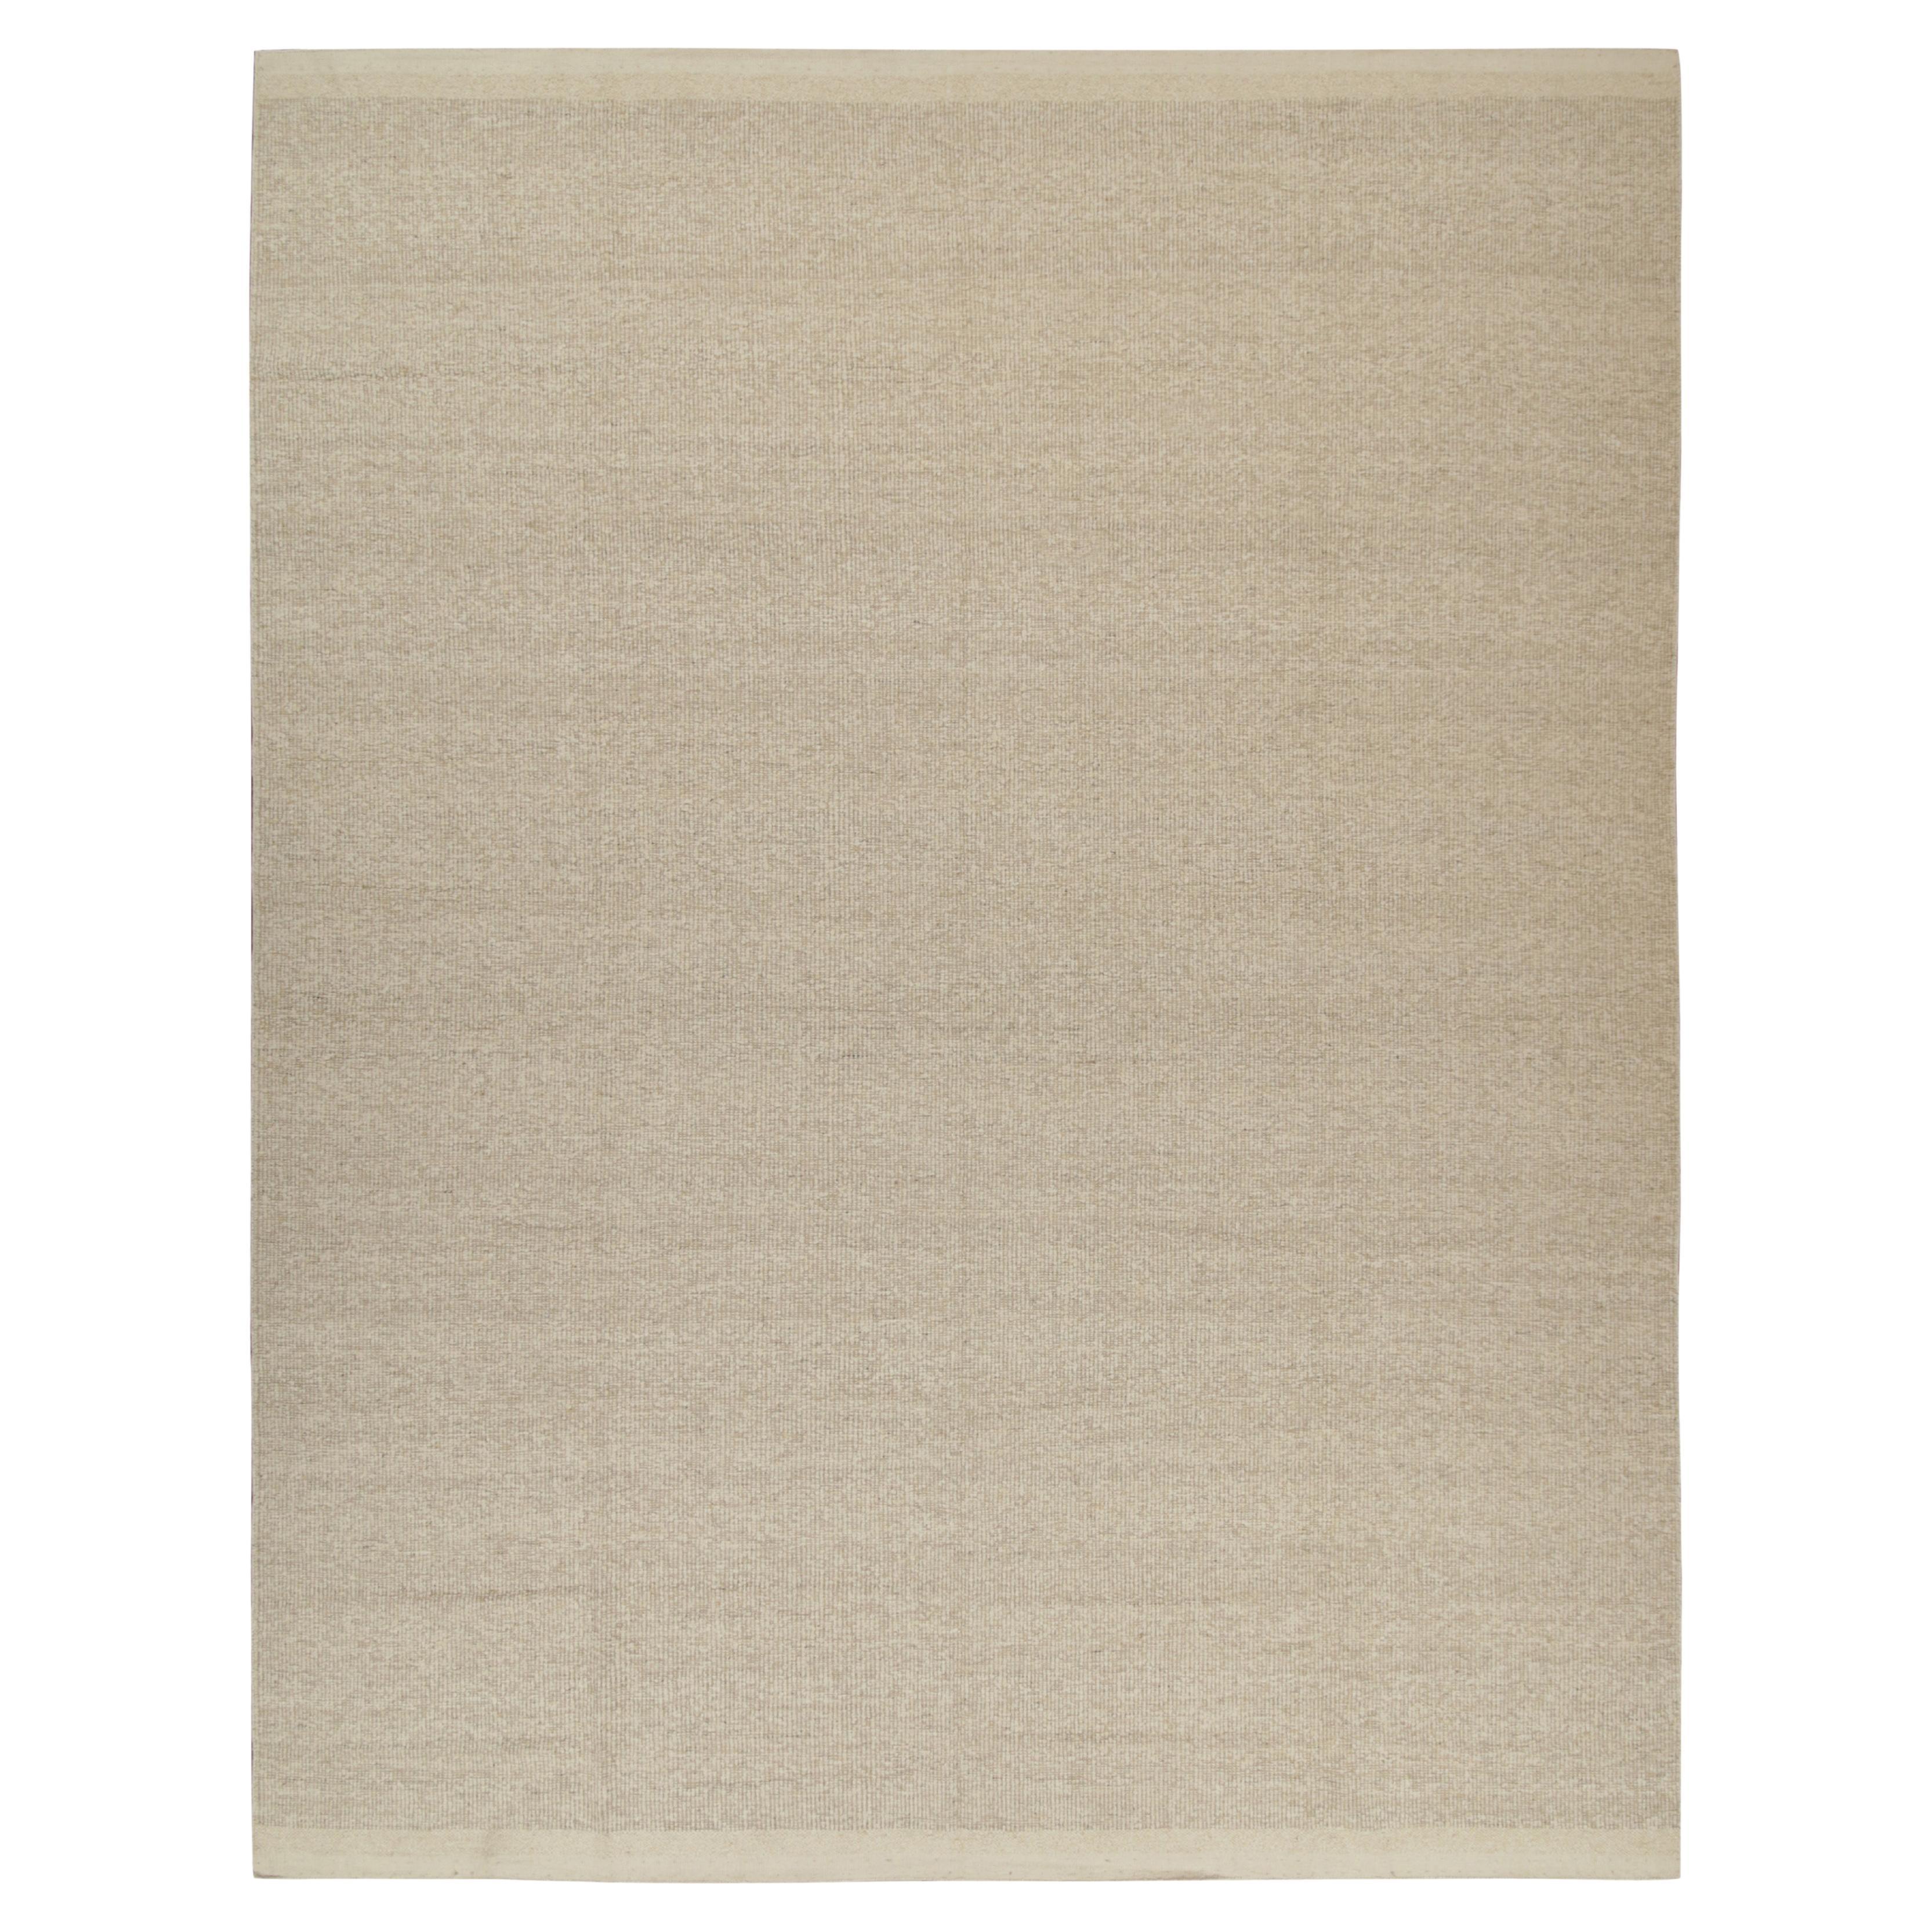 Rug & Kilim’s Contemporary Flat Weave in Solid Beige and White Boucle For Sale